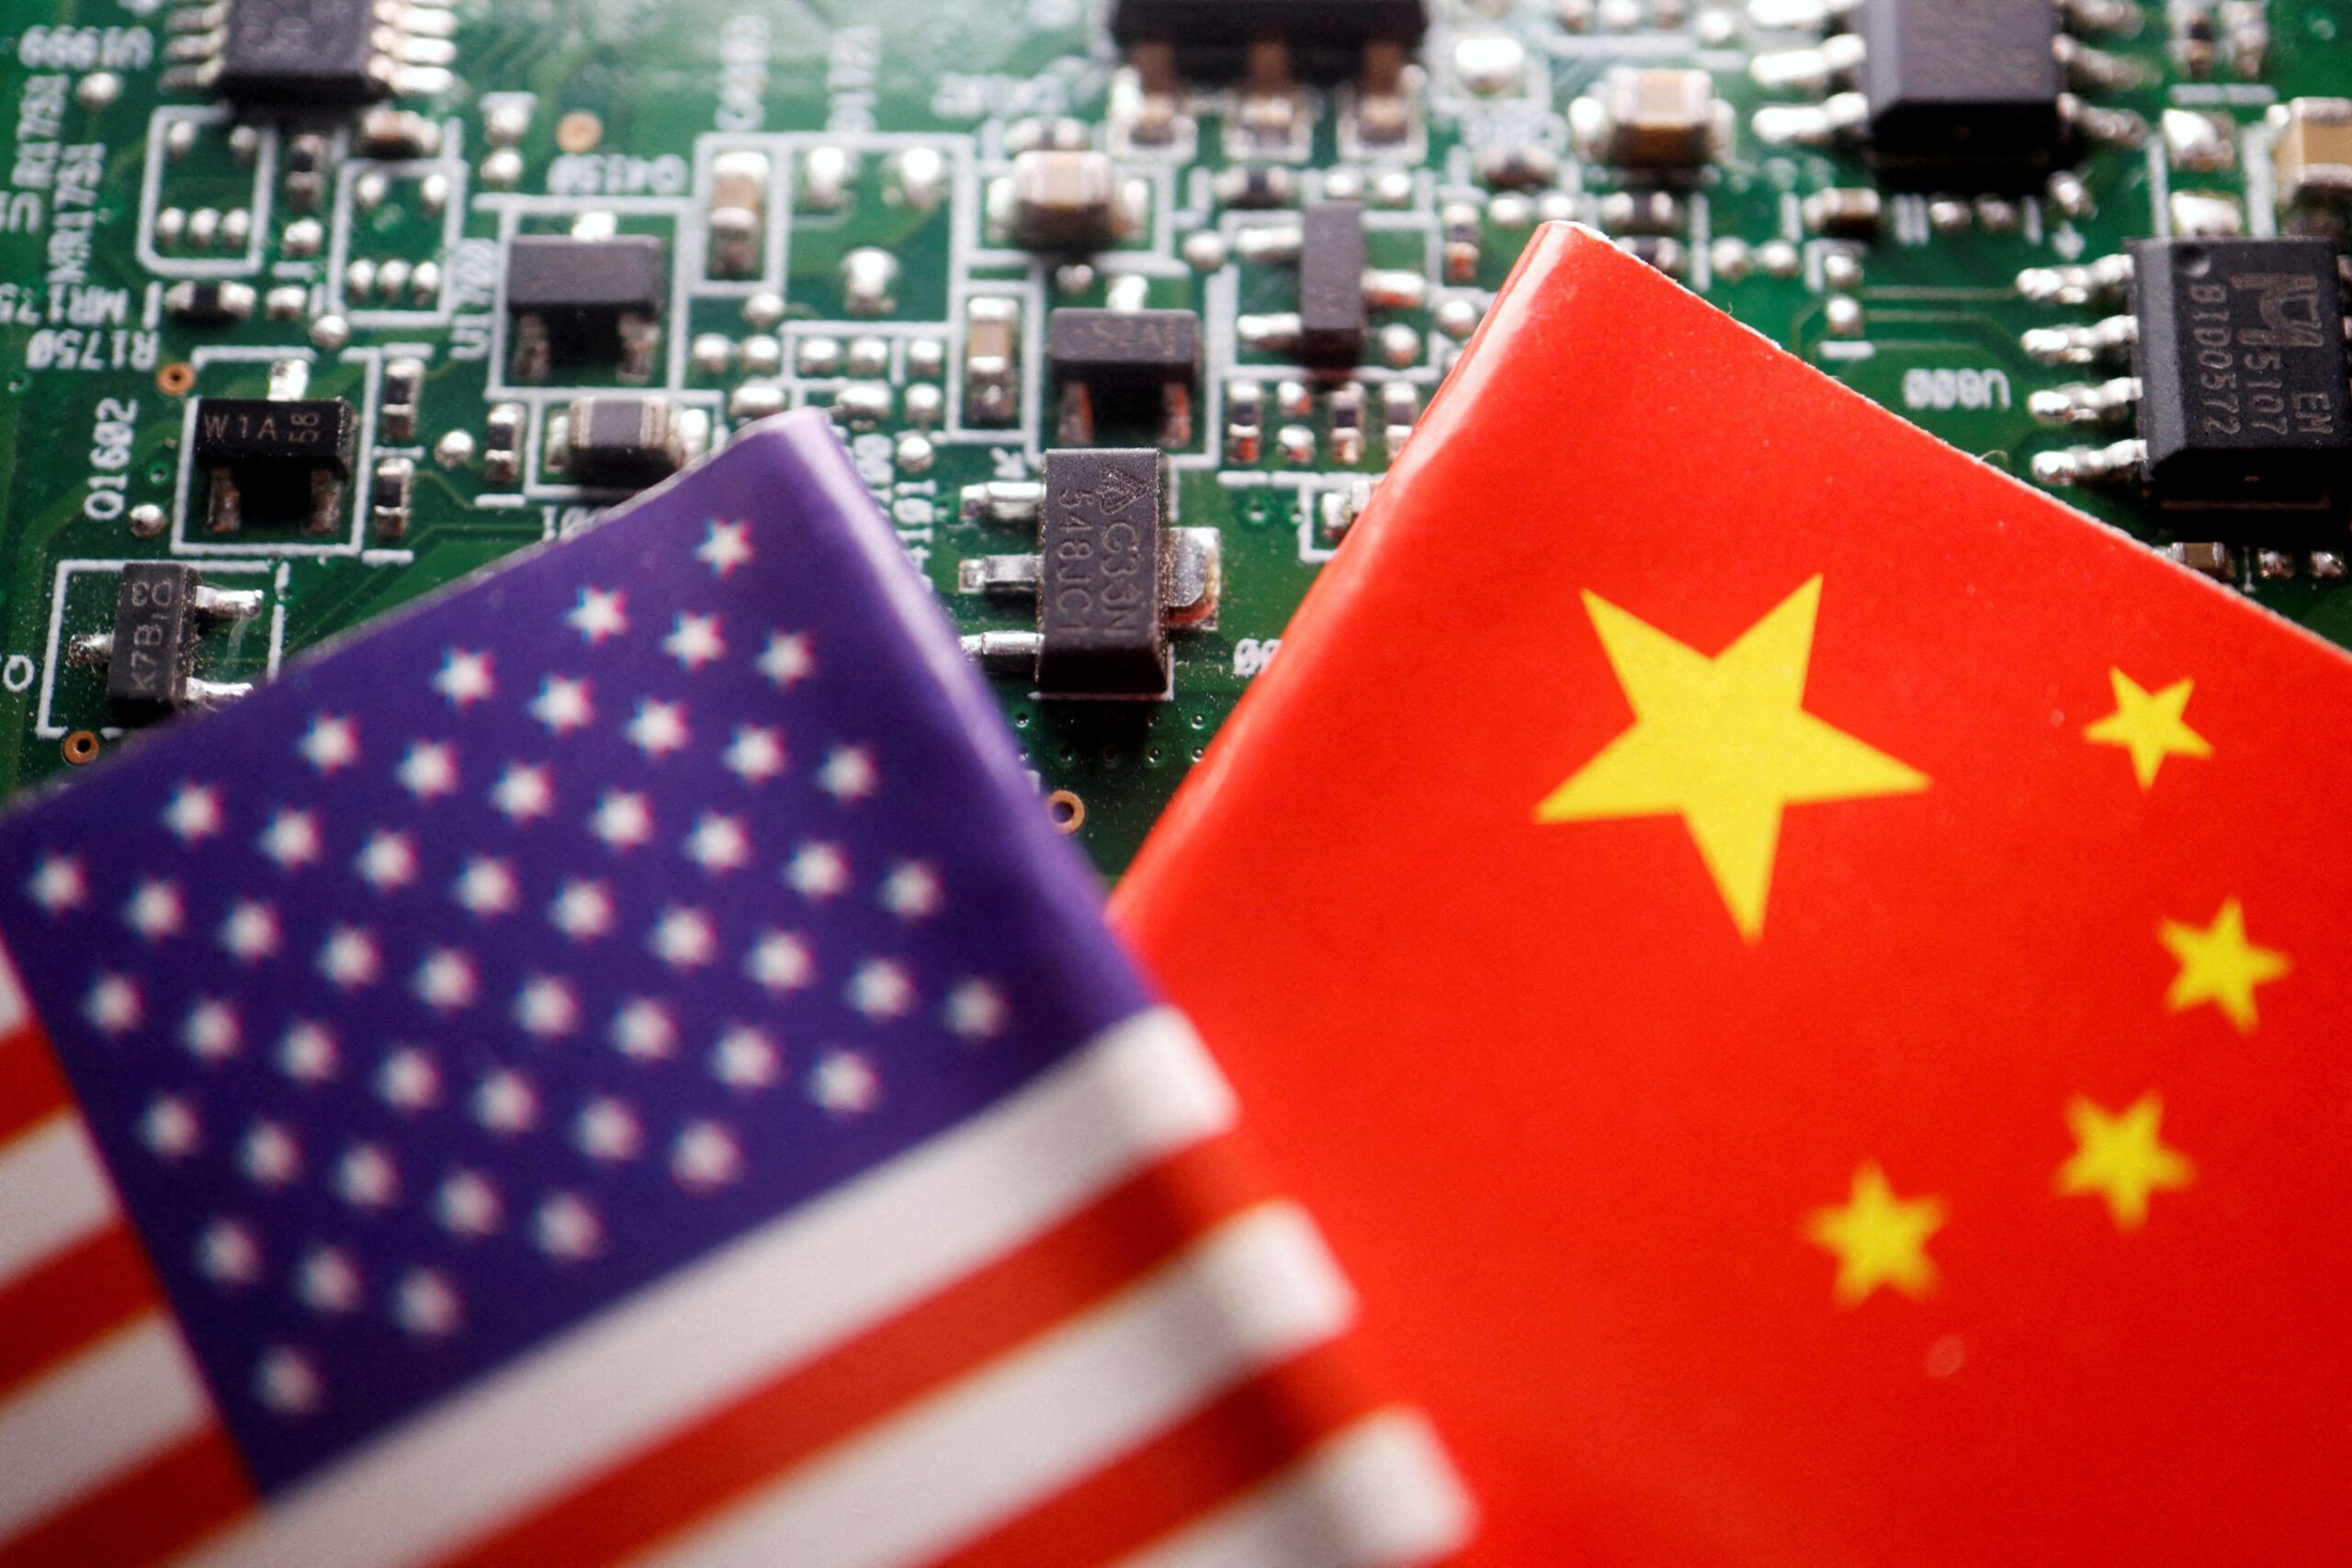 US eyes curbs on China's access to AI software behind apps like ChatGPT